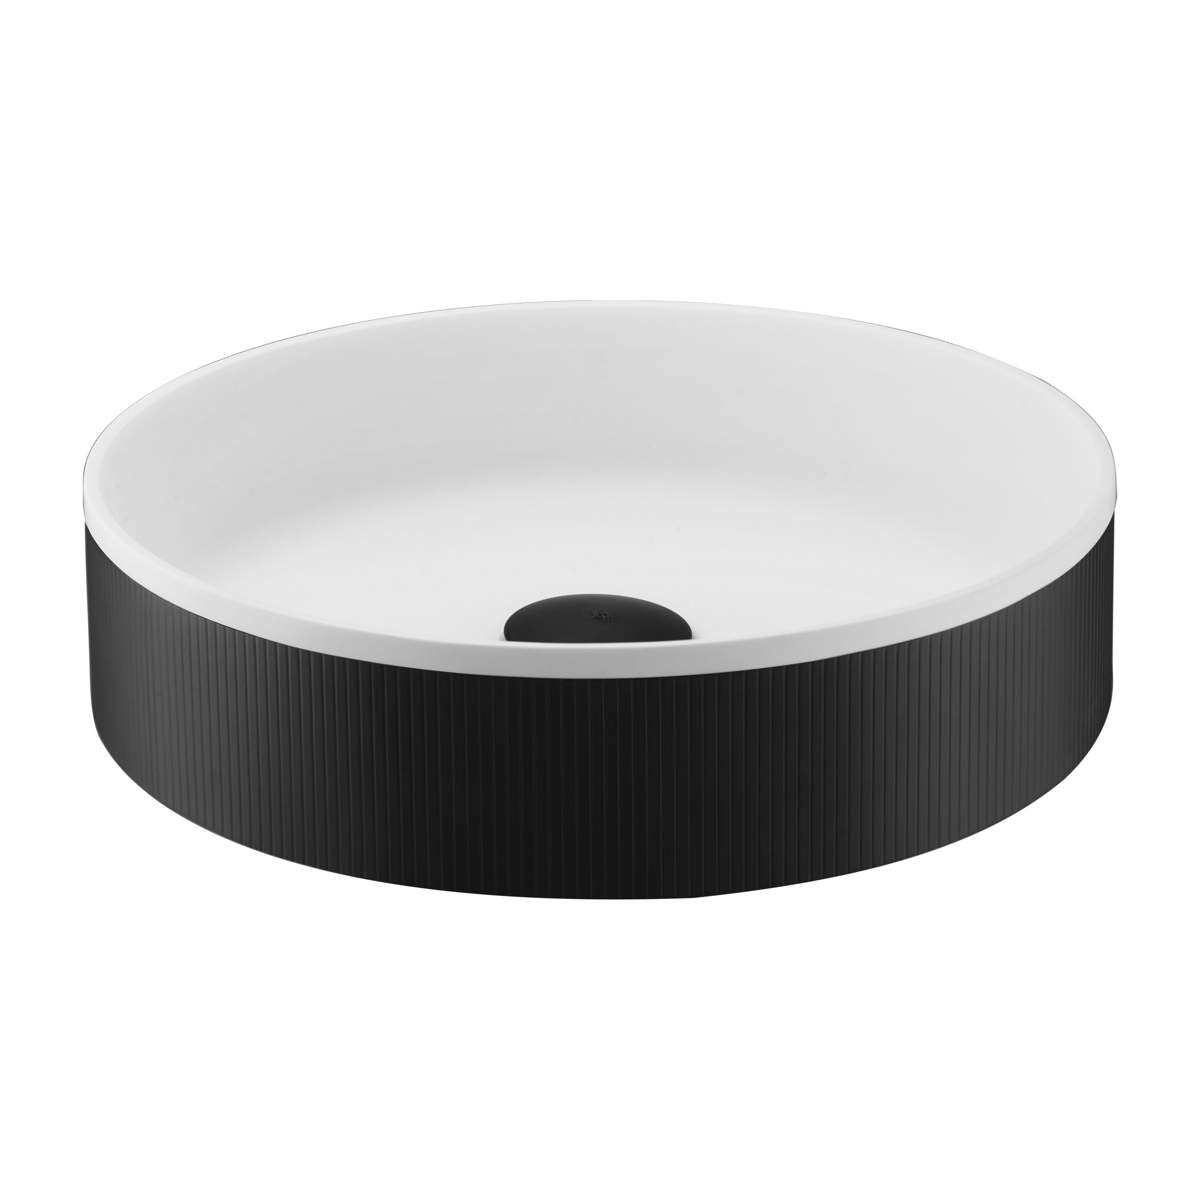 JTP Evo Matt Black Counter Top Basin with Unslotted Click Clack Waste (68CTR360MB)